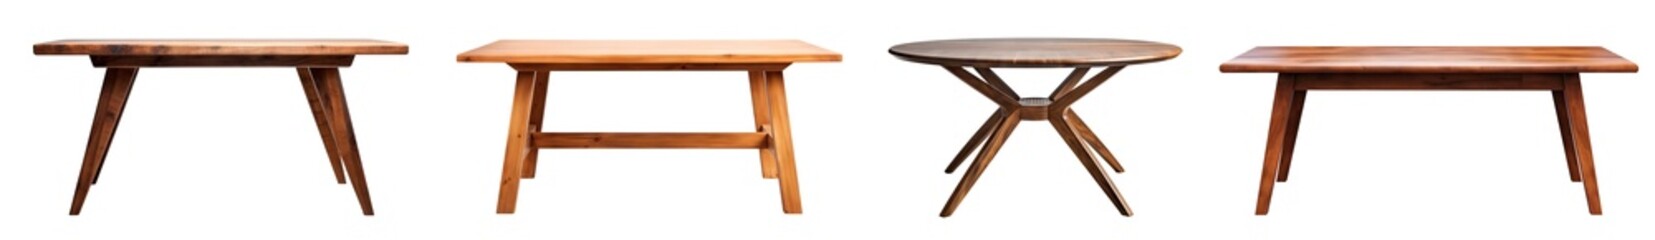 Set of wooden tables, cut out